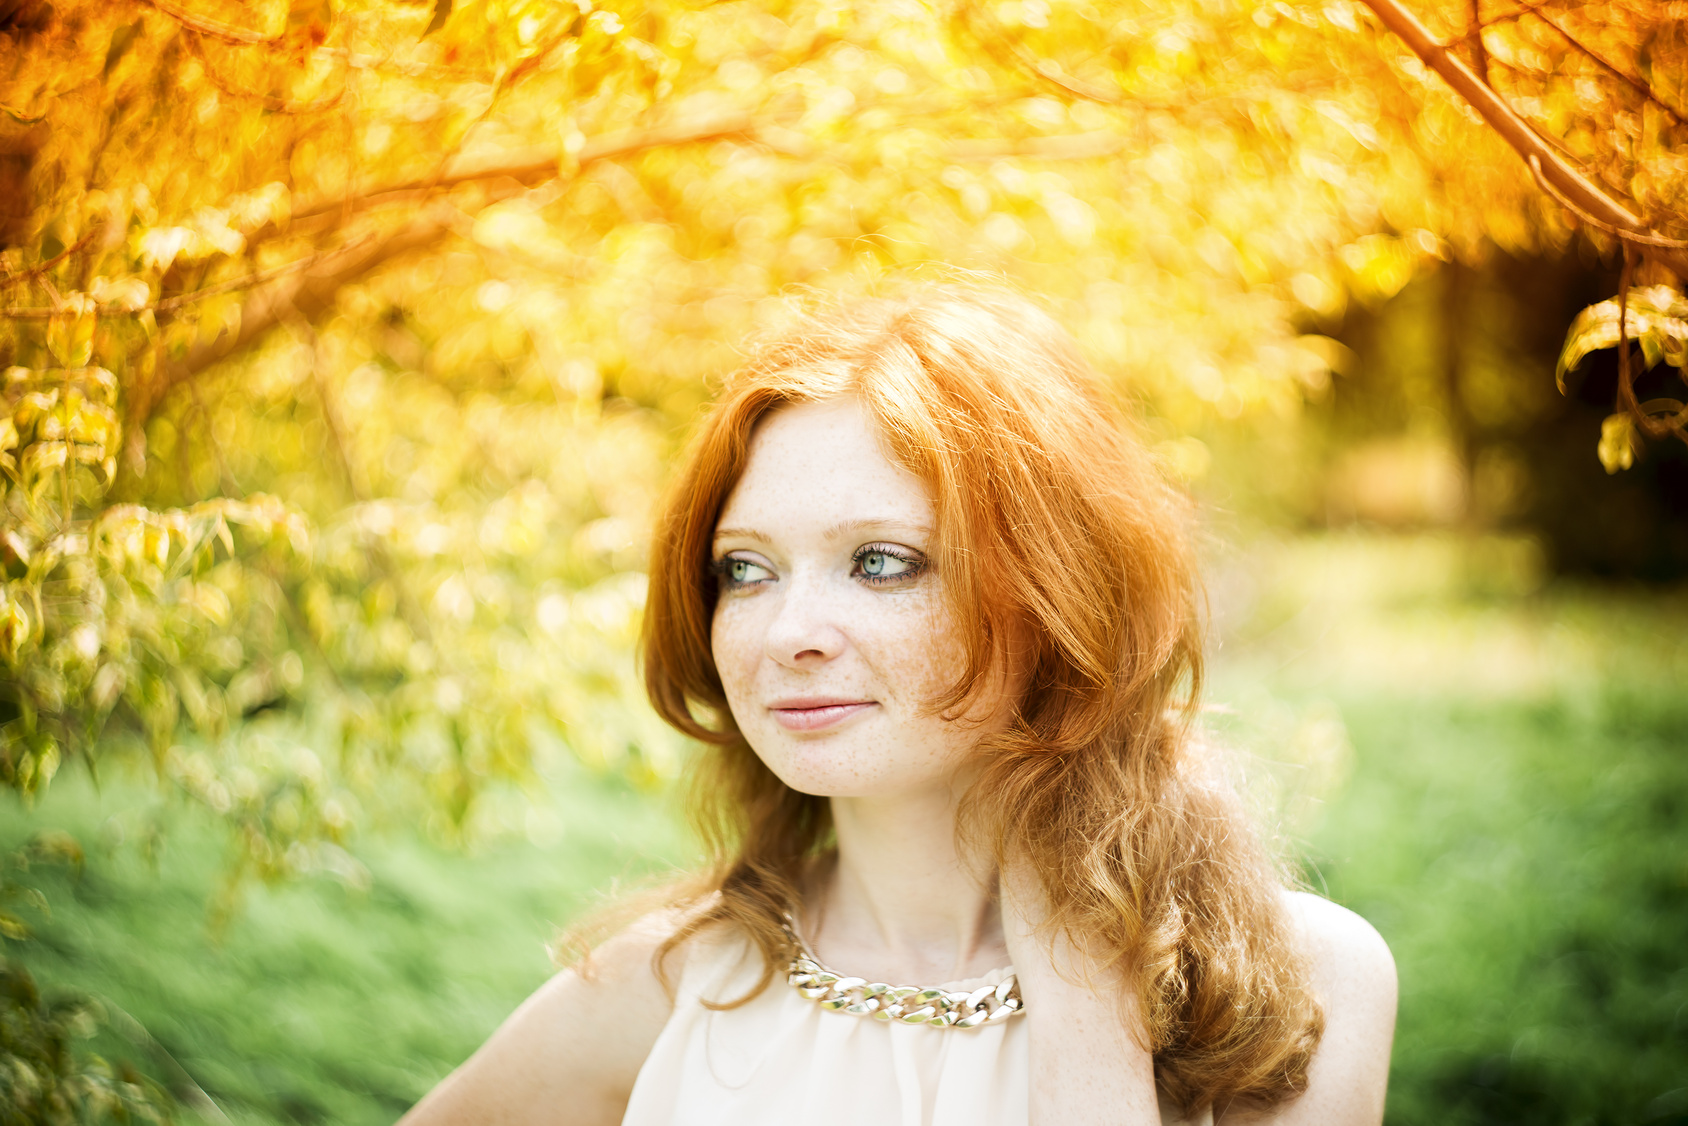 Portrait of redhead girl with blue eyes on nature